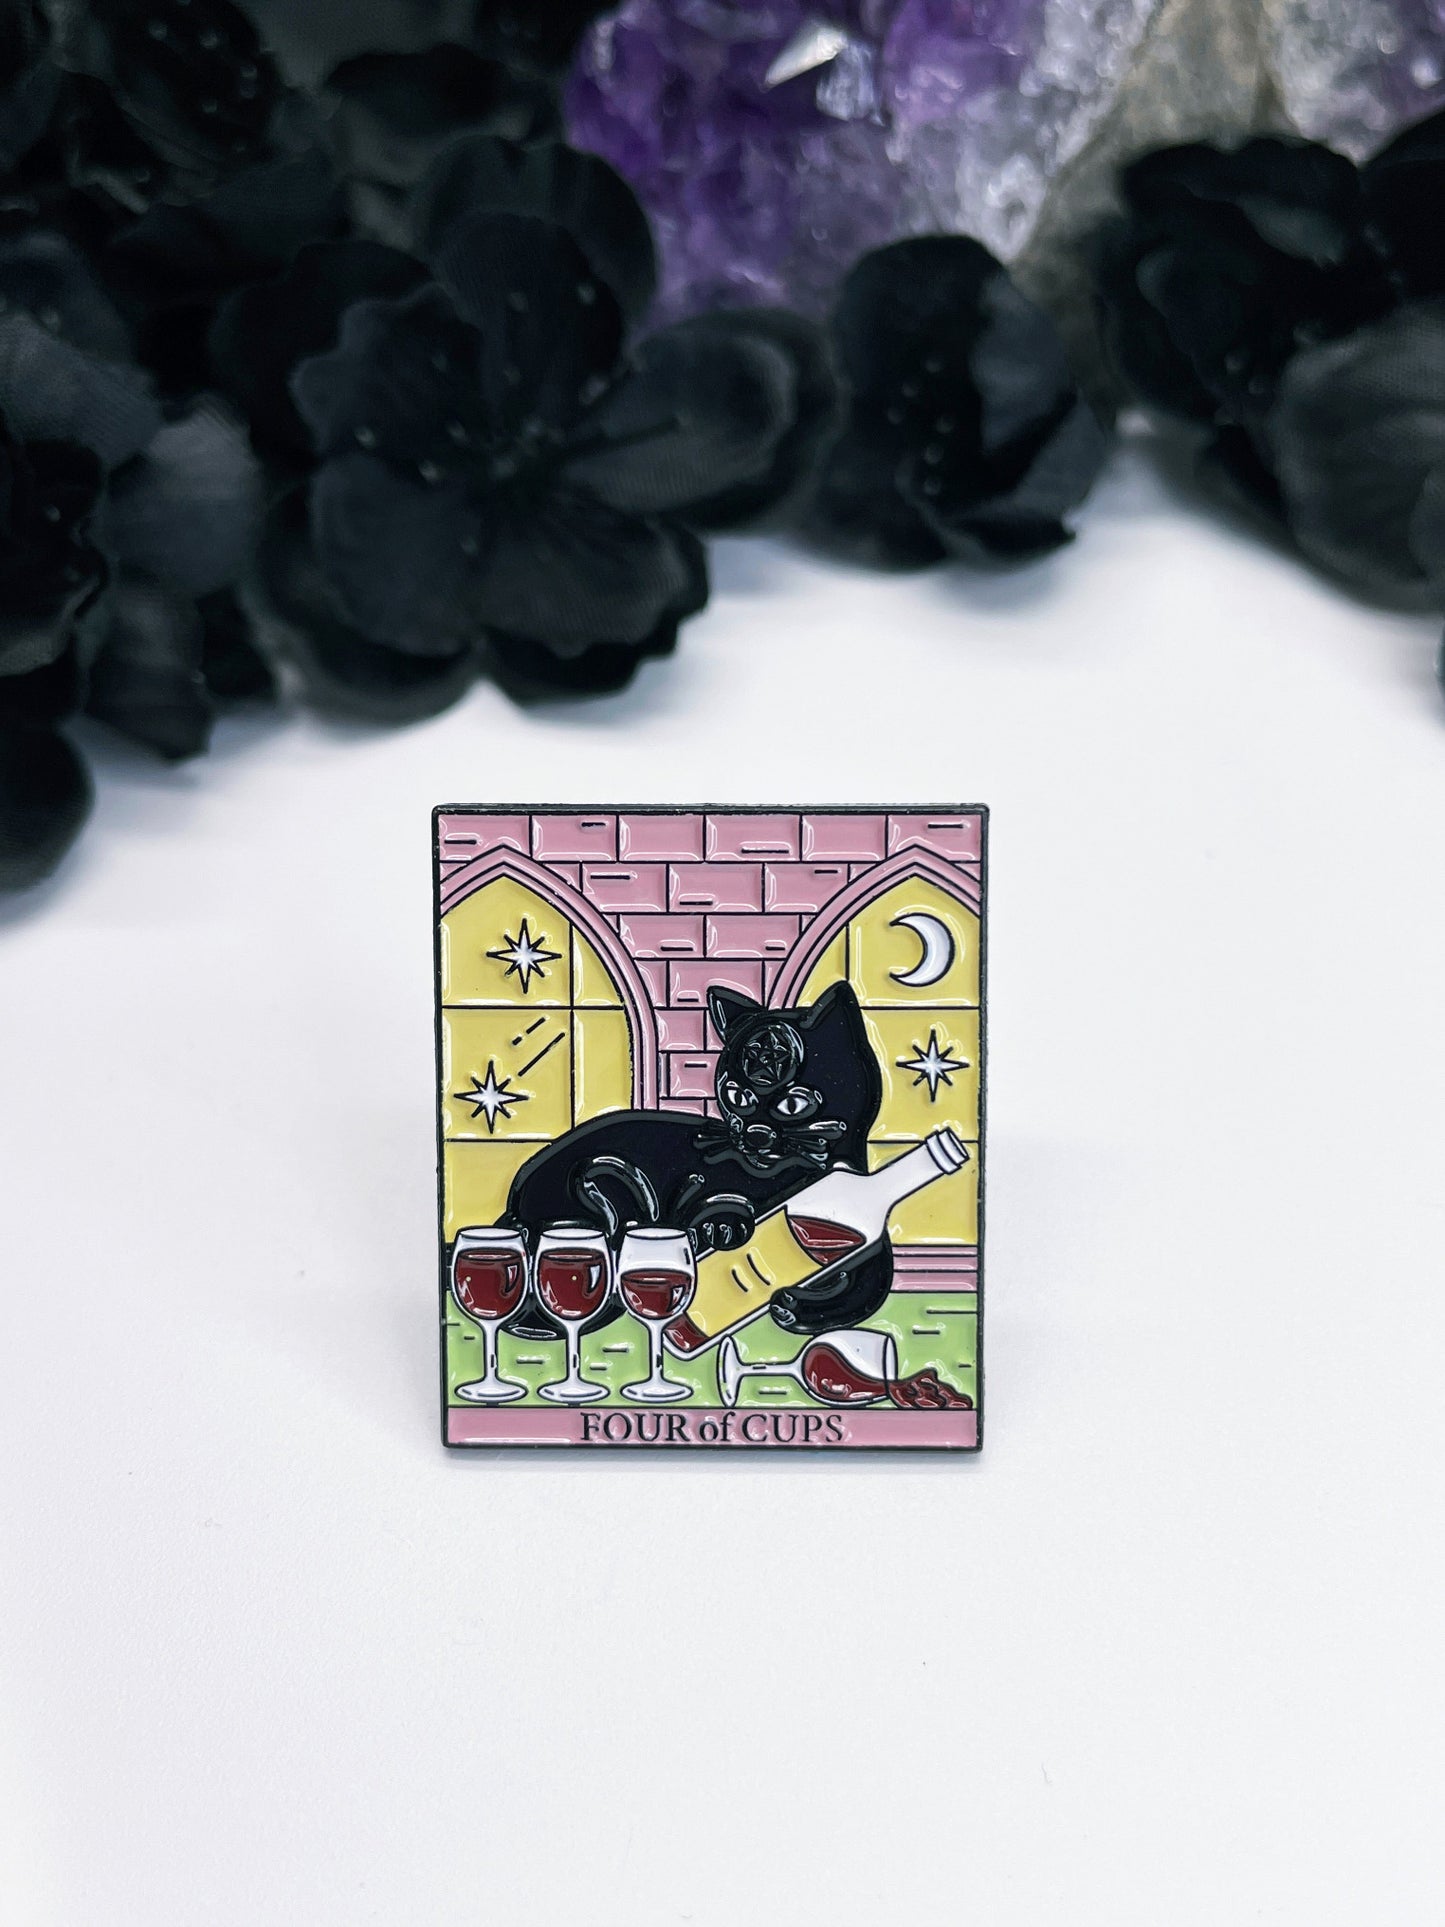 An image of an enamel pin featuring the Tarot card "Four of Cups" with a black cat pouring glasses of wine. The pin is circular with a black border and has one metal fastener on the back. The card features a black cat sitting in front of a table with four cups, pouring wine out.